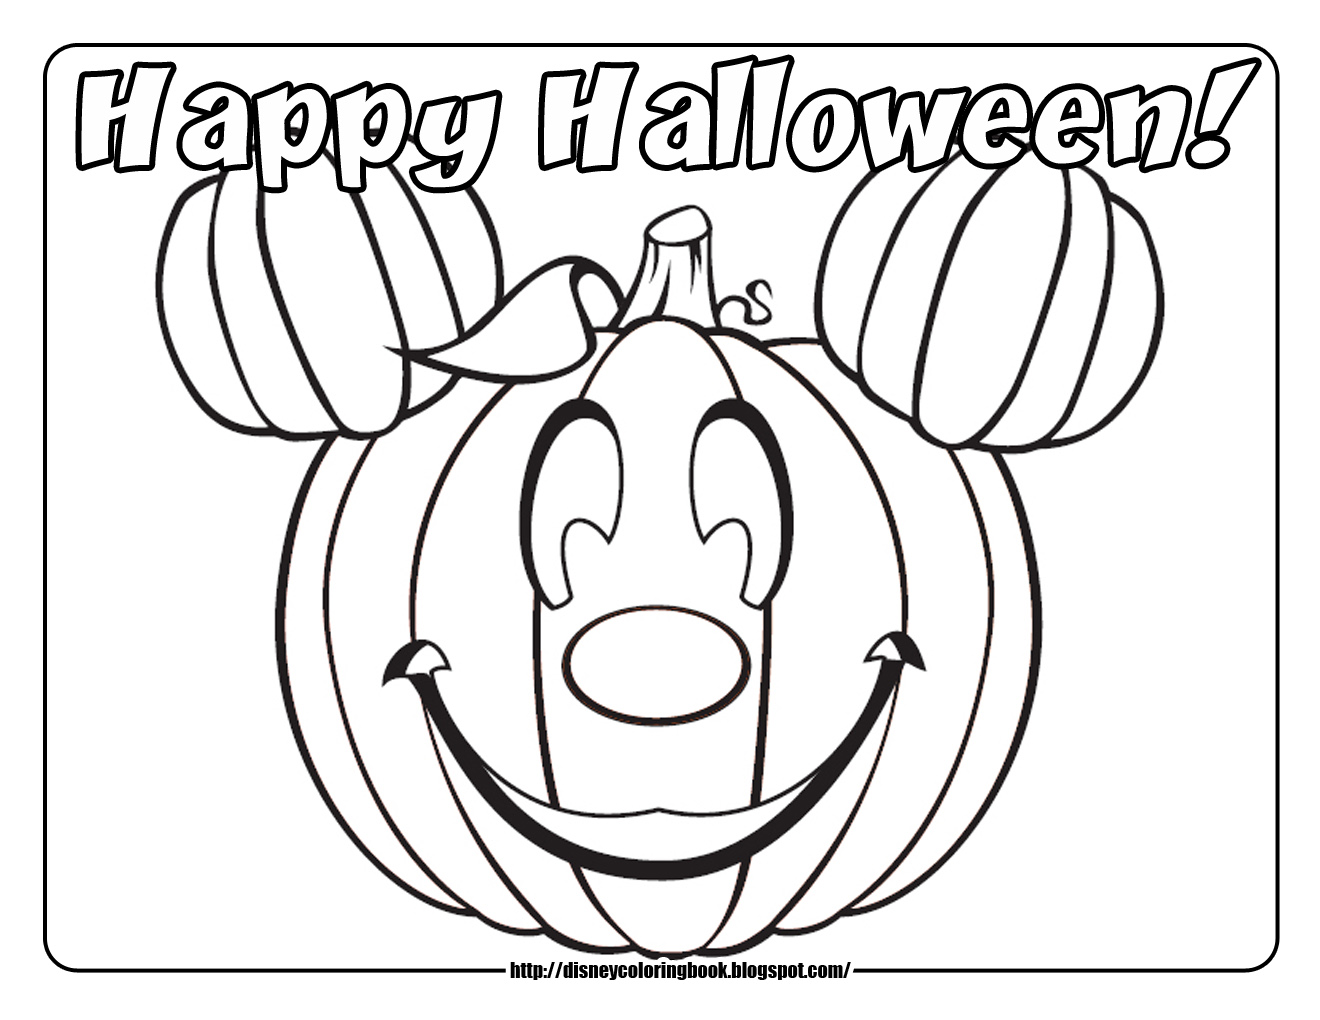 Halloween Coloring Pages Pdf at GetDrawings.com | Free for personal use